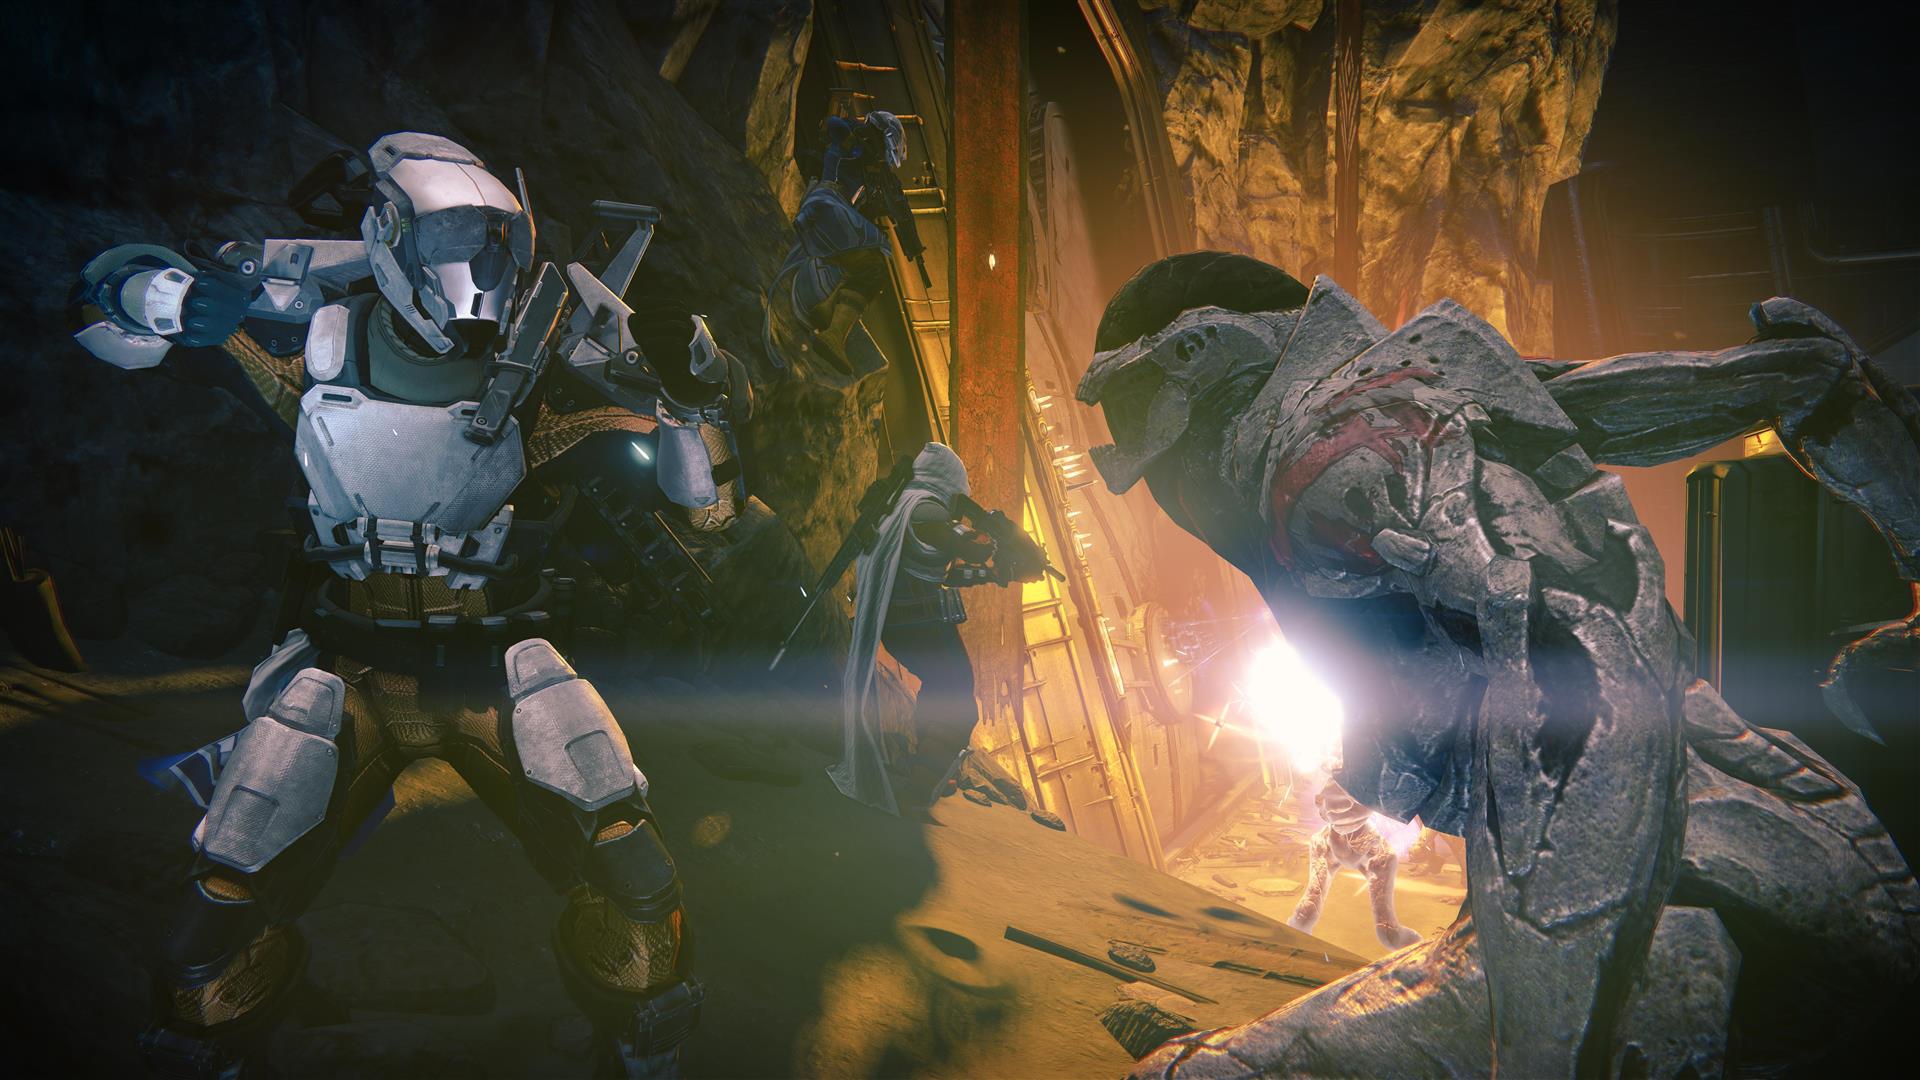 Destiny update 1.1.1 shoves matchmaking into Weekly Heroic Strikes, solo  runs no longer allowed - Neoseeker